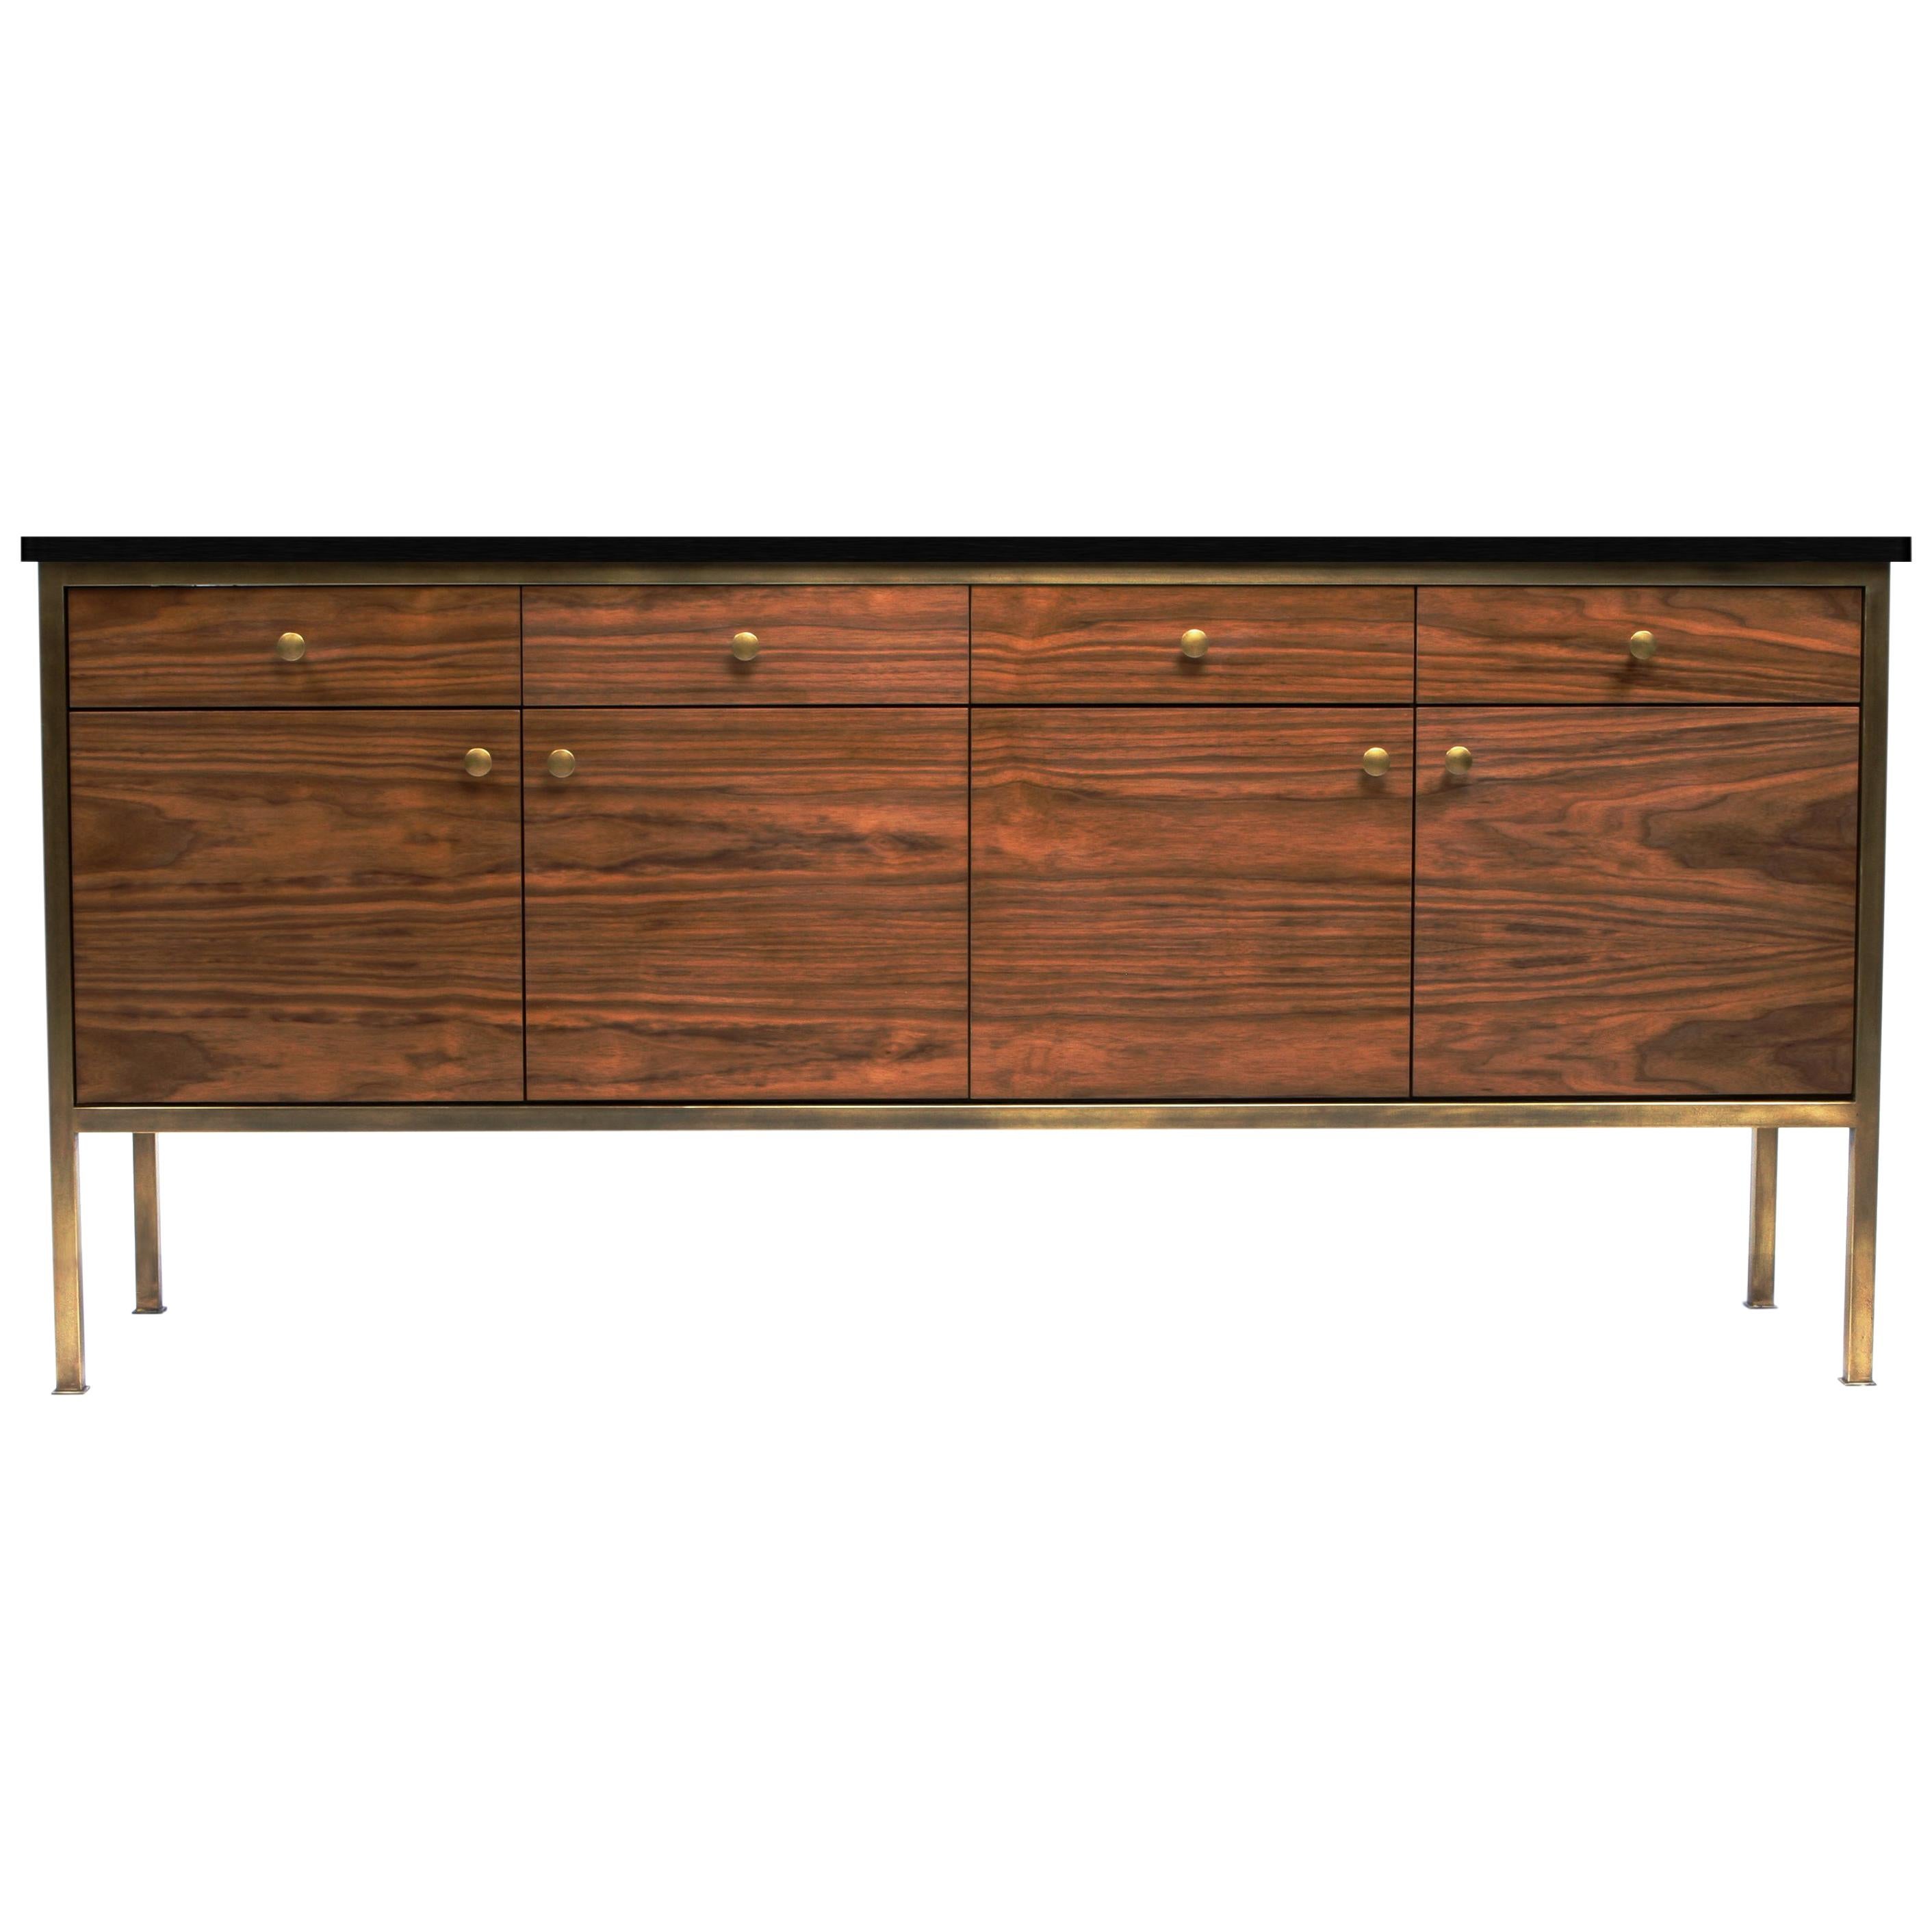 90° Stone Top & Walnut Buffet Cabinet, Vica designed by Annabelle Selldorf